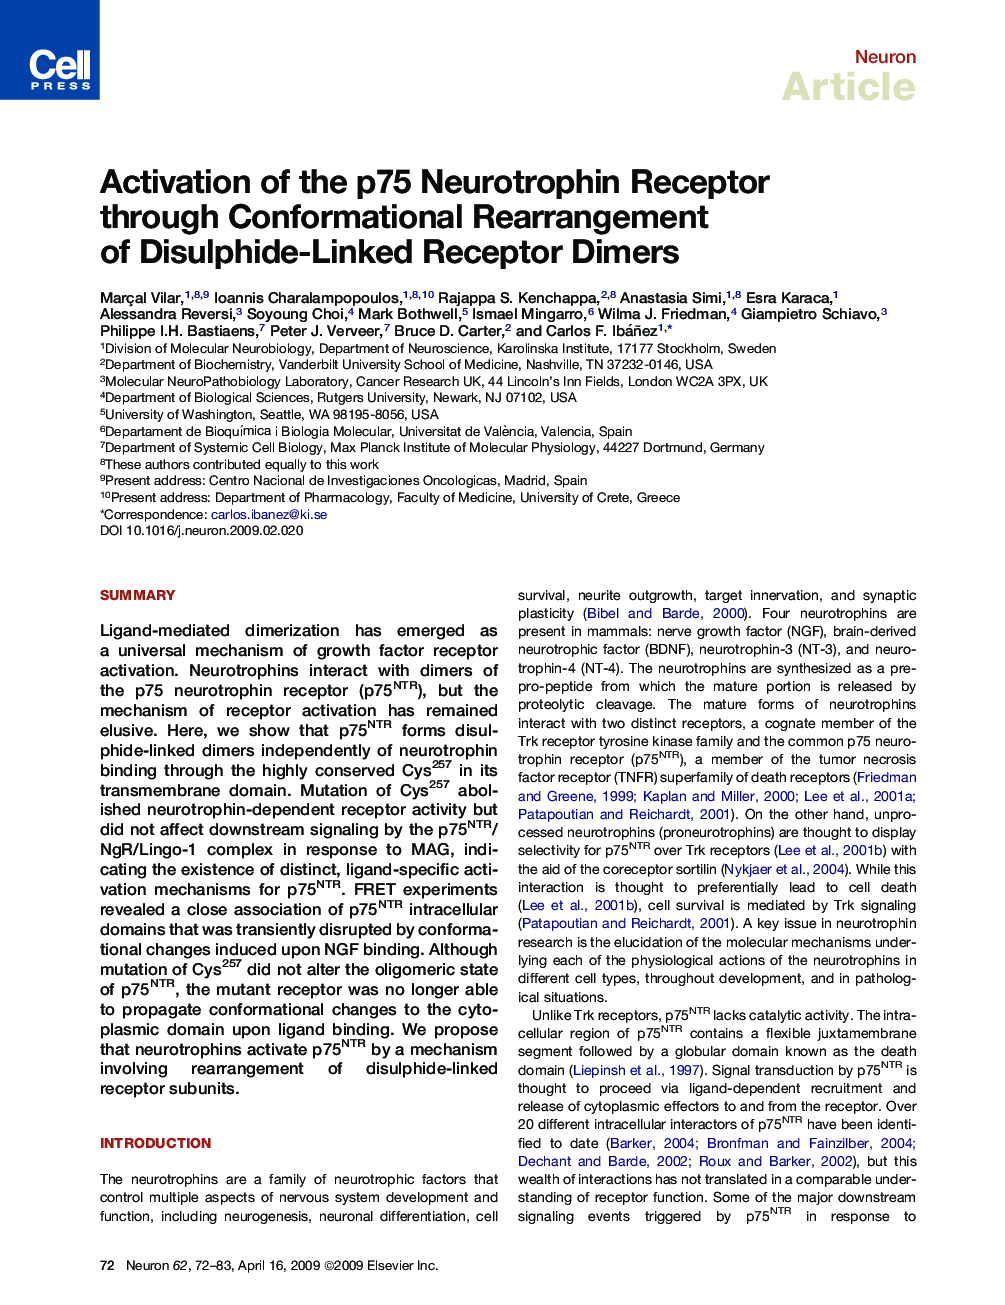 Activation of the p75 Neurotrophin Receptor through Conformational Rearrangement of Disulphide-Linked Receptor Dimers